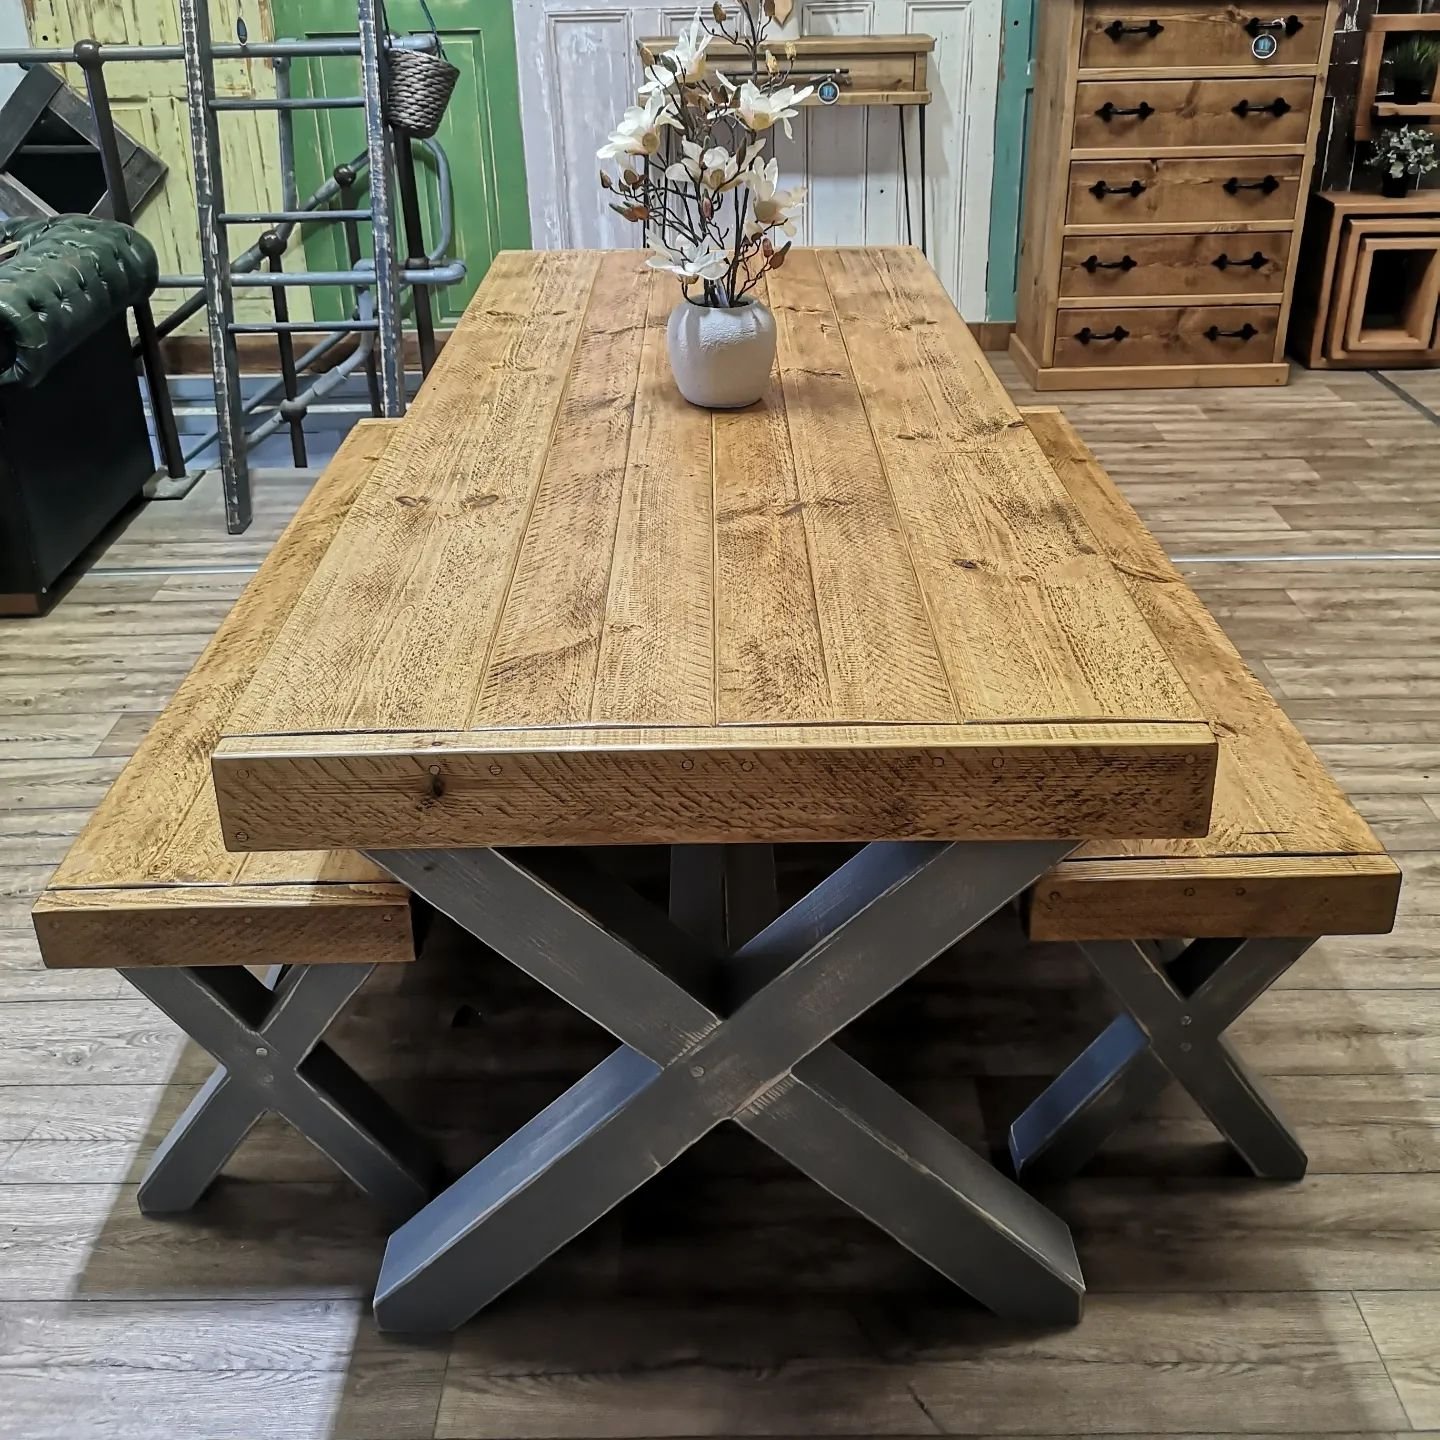 In store now! The Bolton Banquet 2m Dining Set in Rugger Brown &amp; Battlement Grey. Free delivery, install &amp; care kit.

#diningroom #diningtable #diningbench #modernrusticdecor #cleanrustic #homestyling #homerenovation #handmade #rustichomedeco